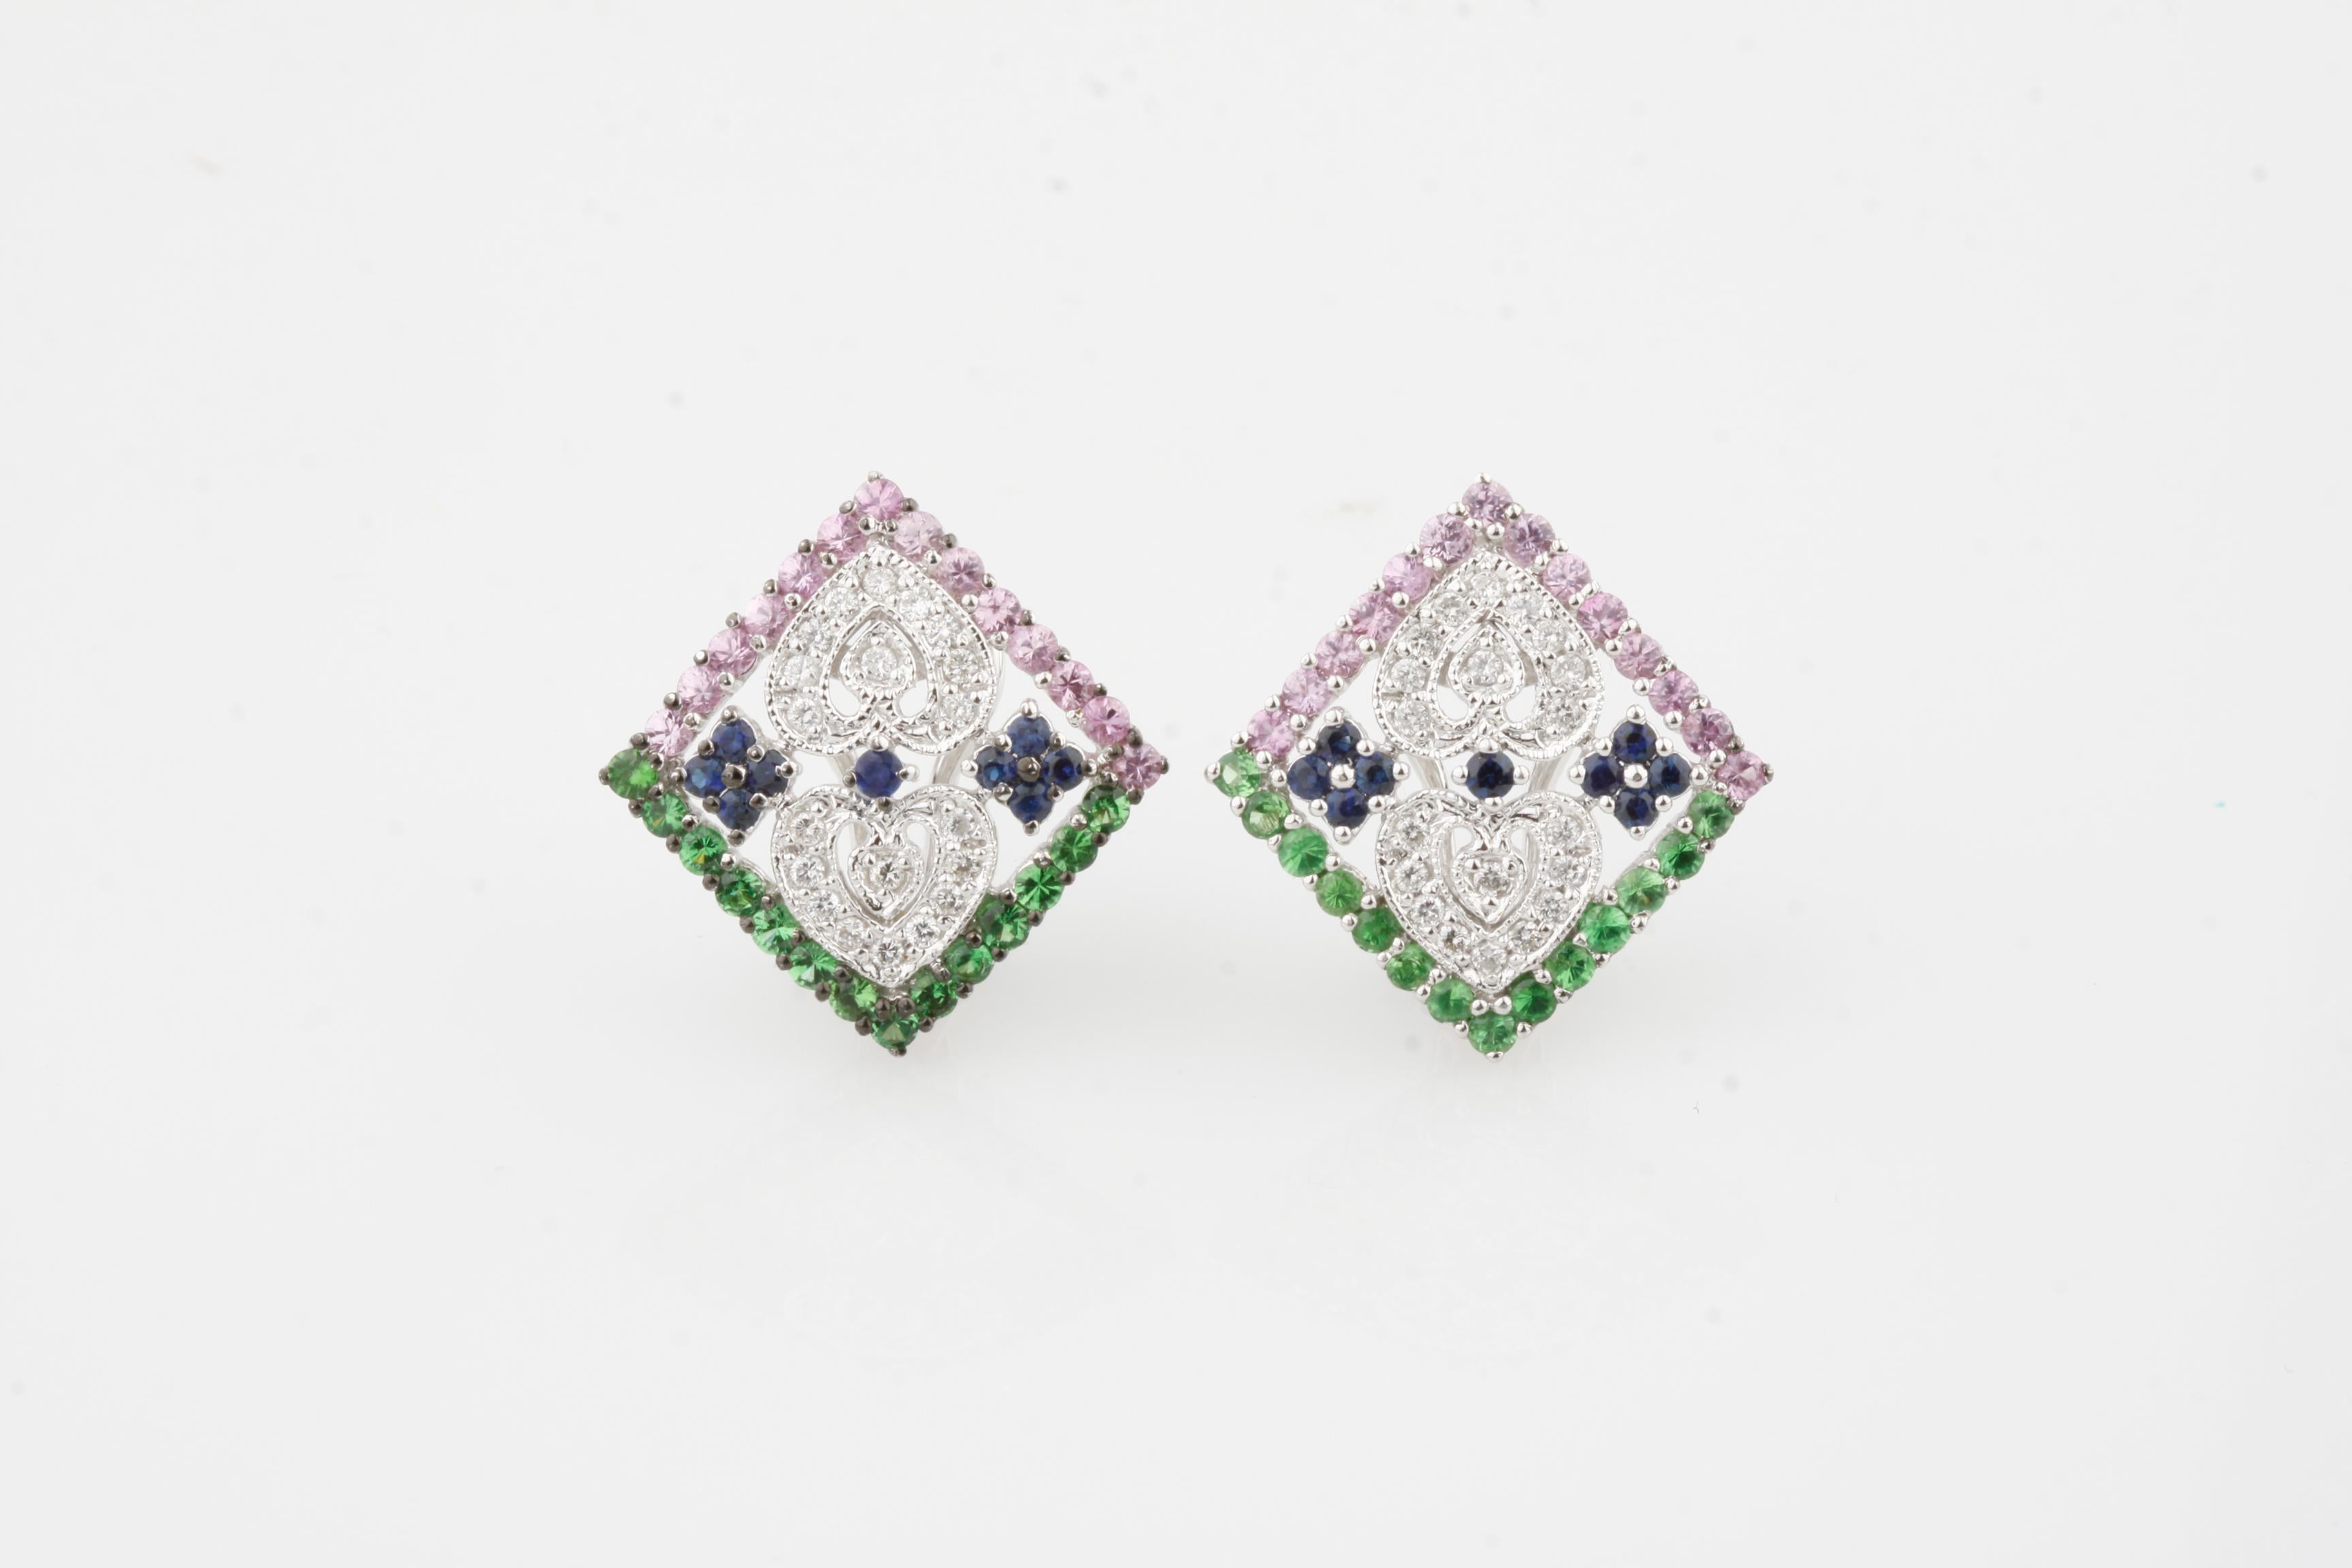 Beautiful Plaque Earrings in 14k White Gold
Pink, Green, and Blue Sapphire
Diamond Heart Accents with Milgrain Detailing
Total Carat Weight of All Stones = 2.87 cts
Dimensions of Plaque = 16 mm x 16 mm 
Total Mass = 7.50 grams